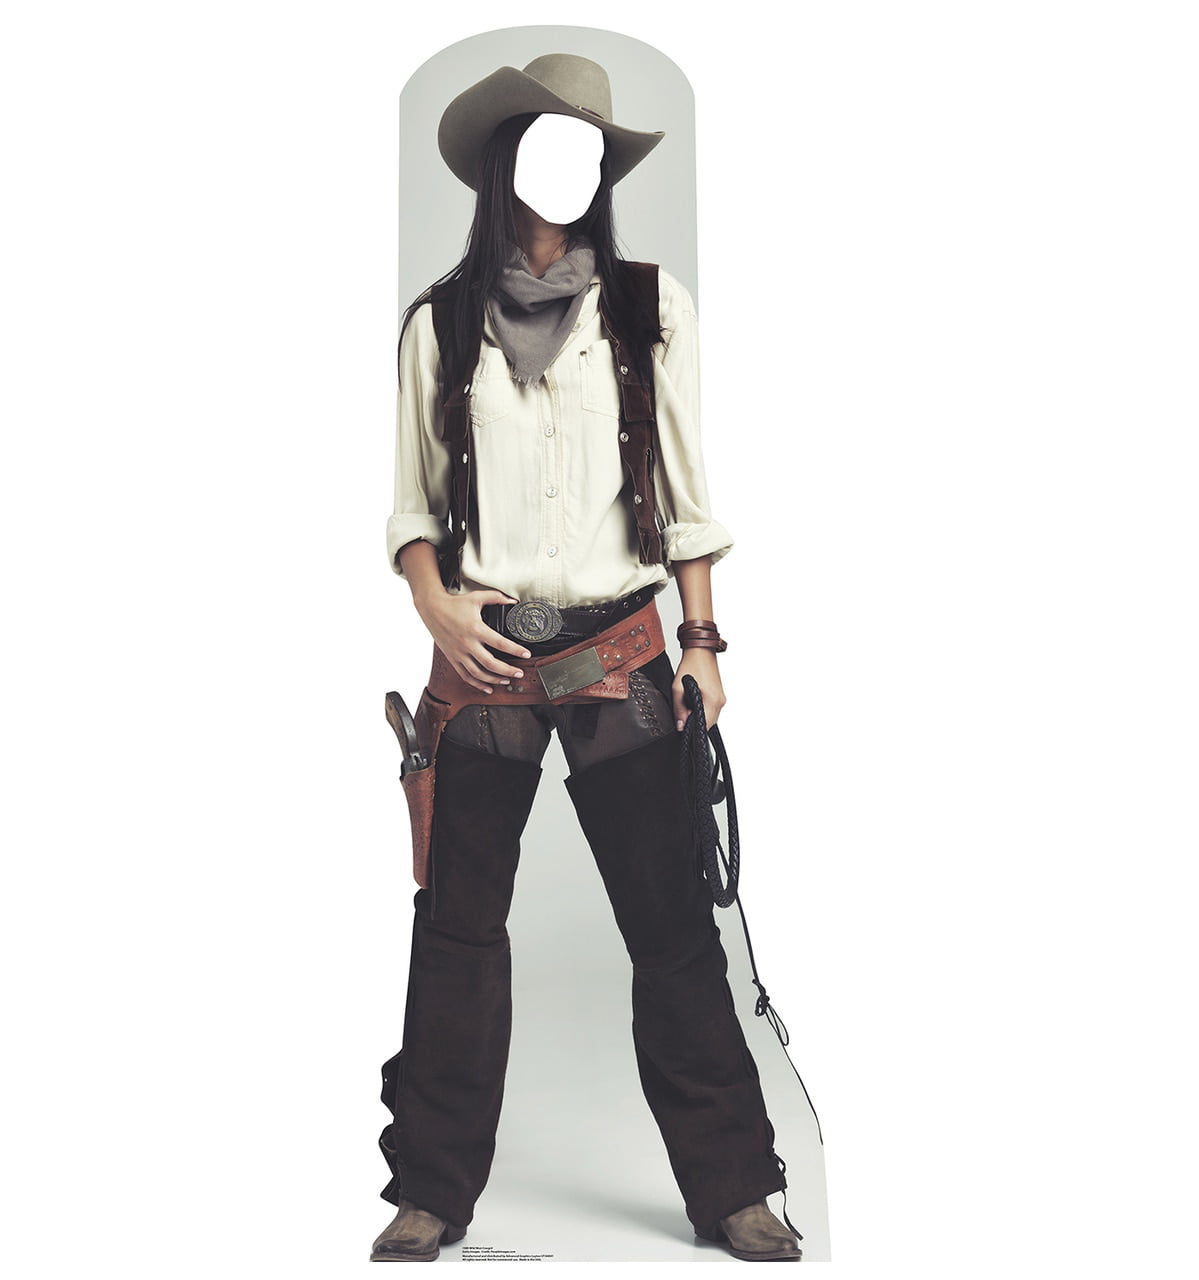 Picture of Advanced Graphics 1980 69 x 26 in. Wild West Cowgirl Standin Cardboard Standup